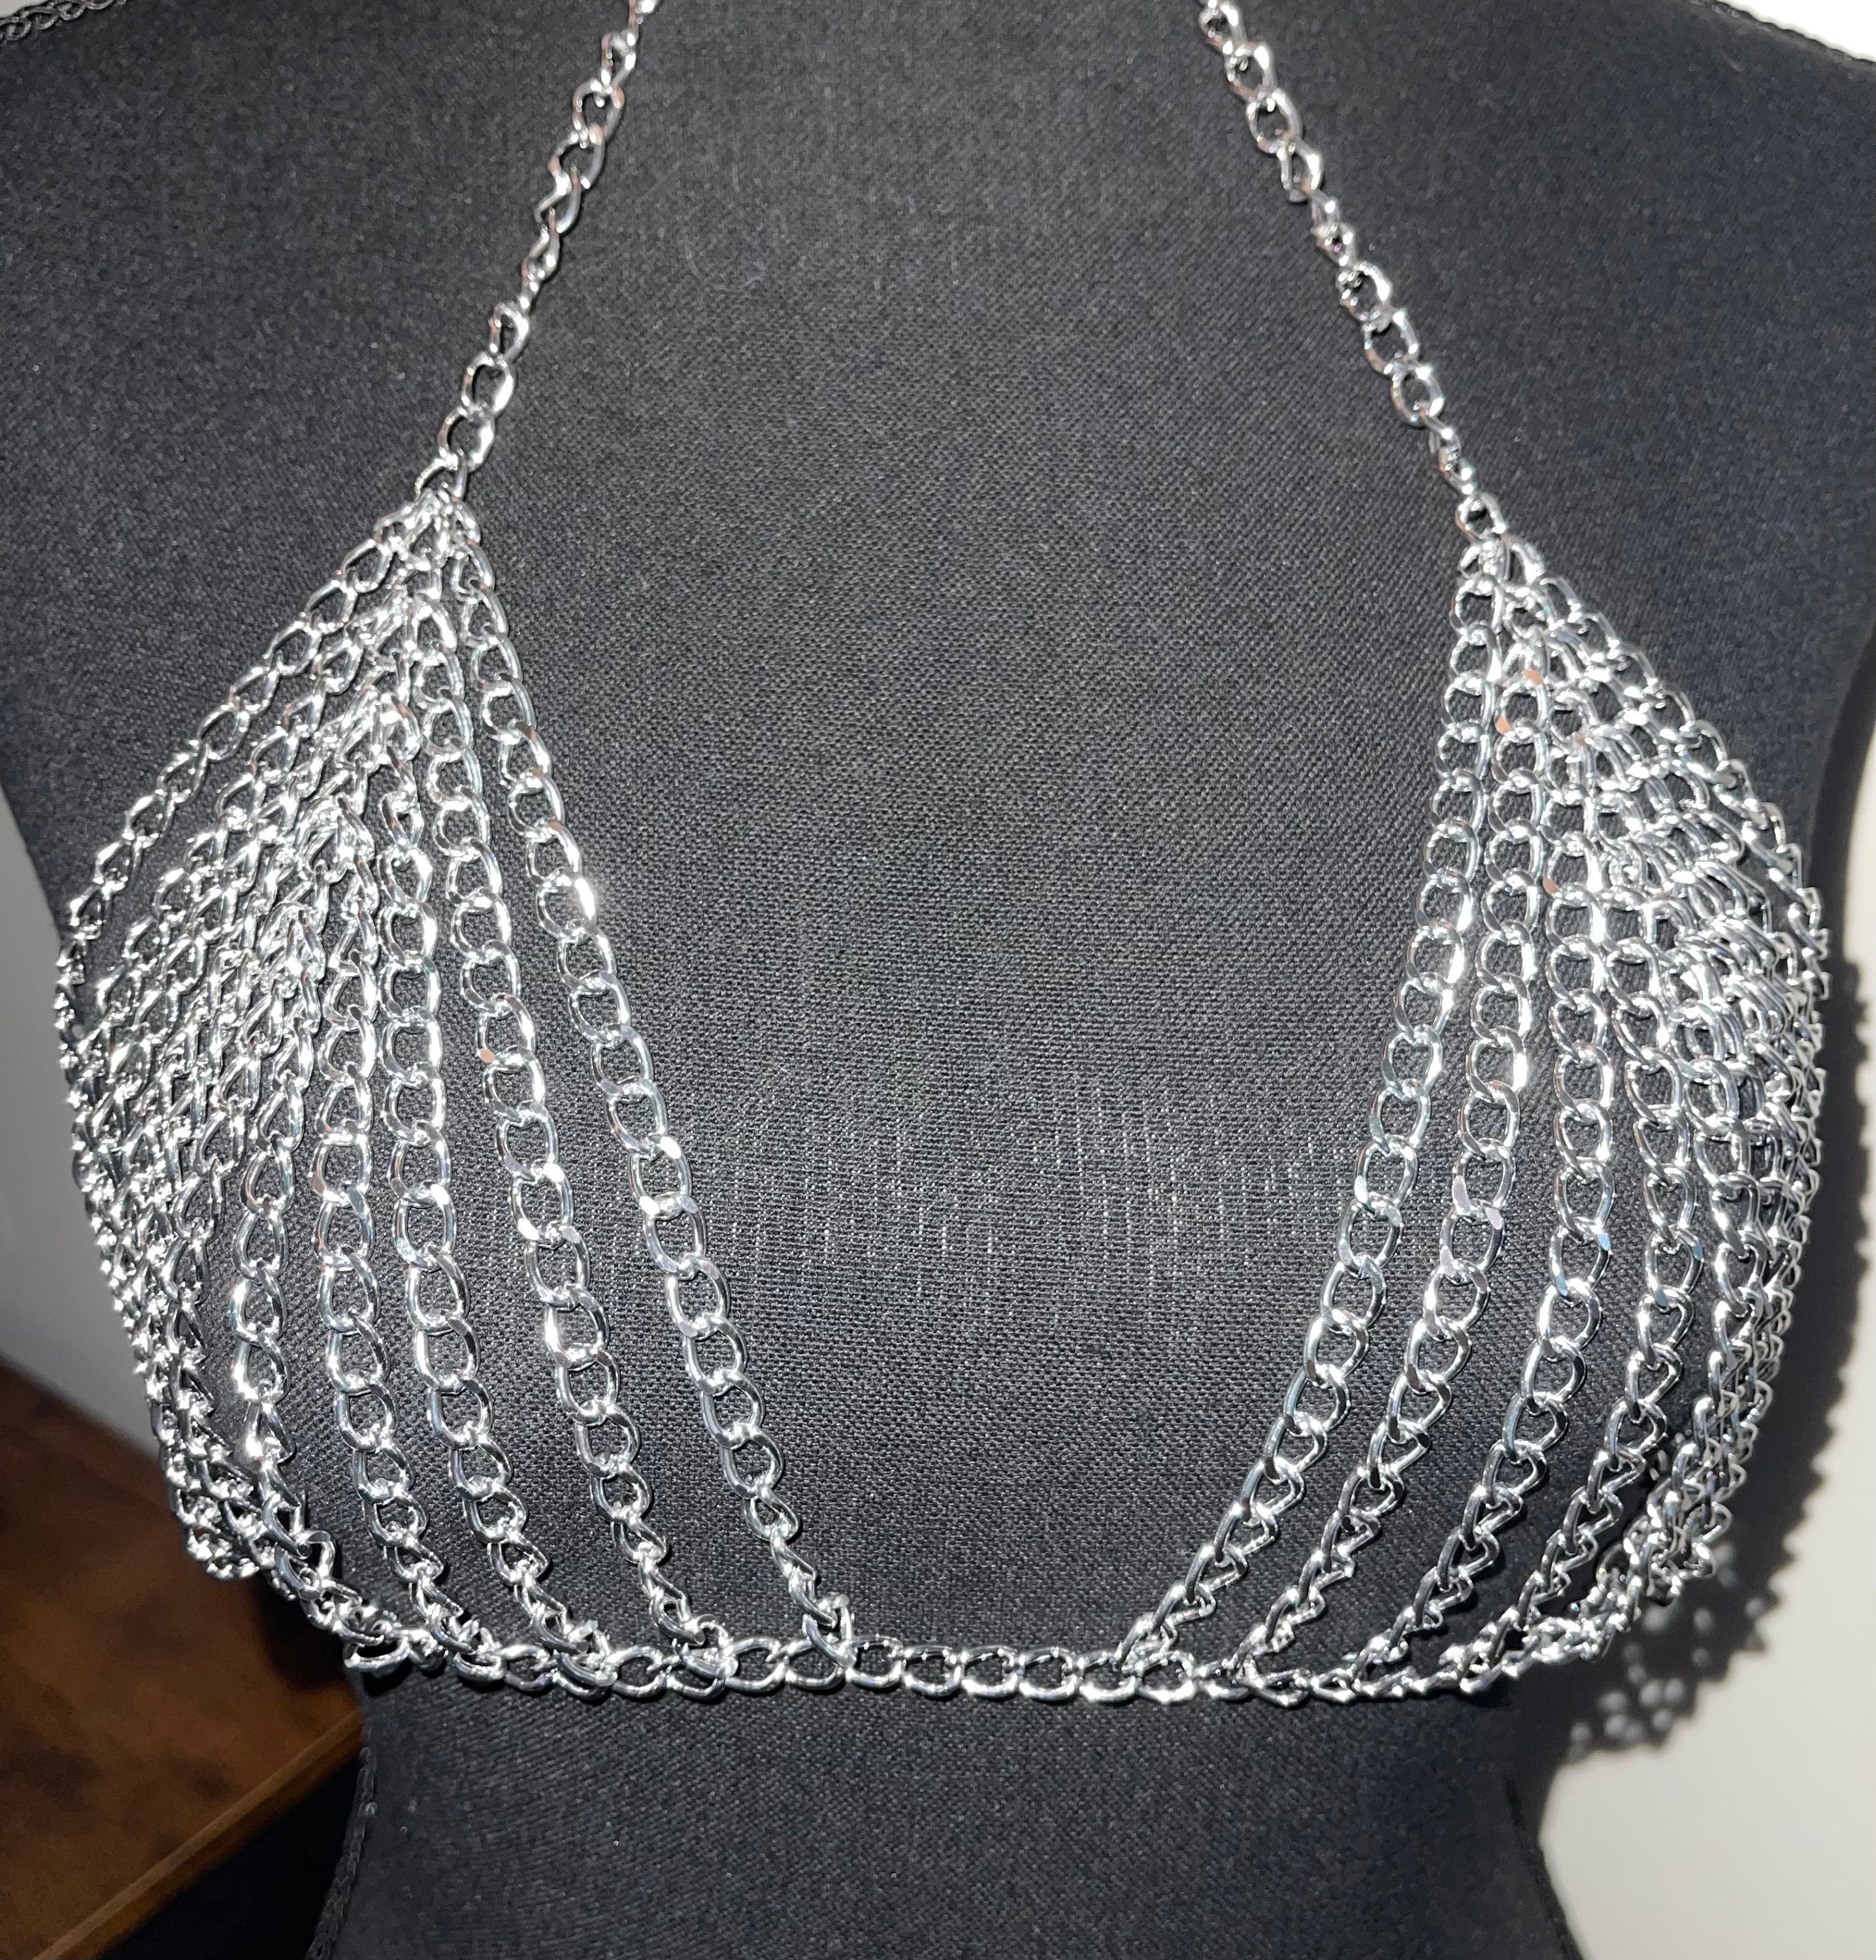 How to Reinforce Bra Cups for Belly Dance Costumes with Chani Pt 1 -  SPARKLY BELLY